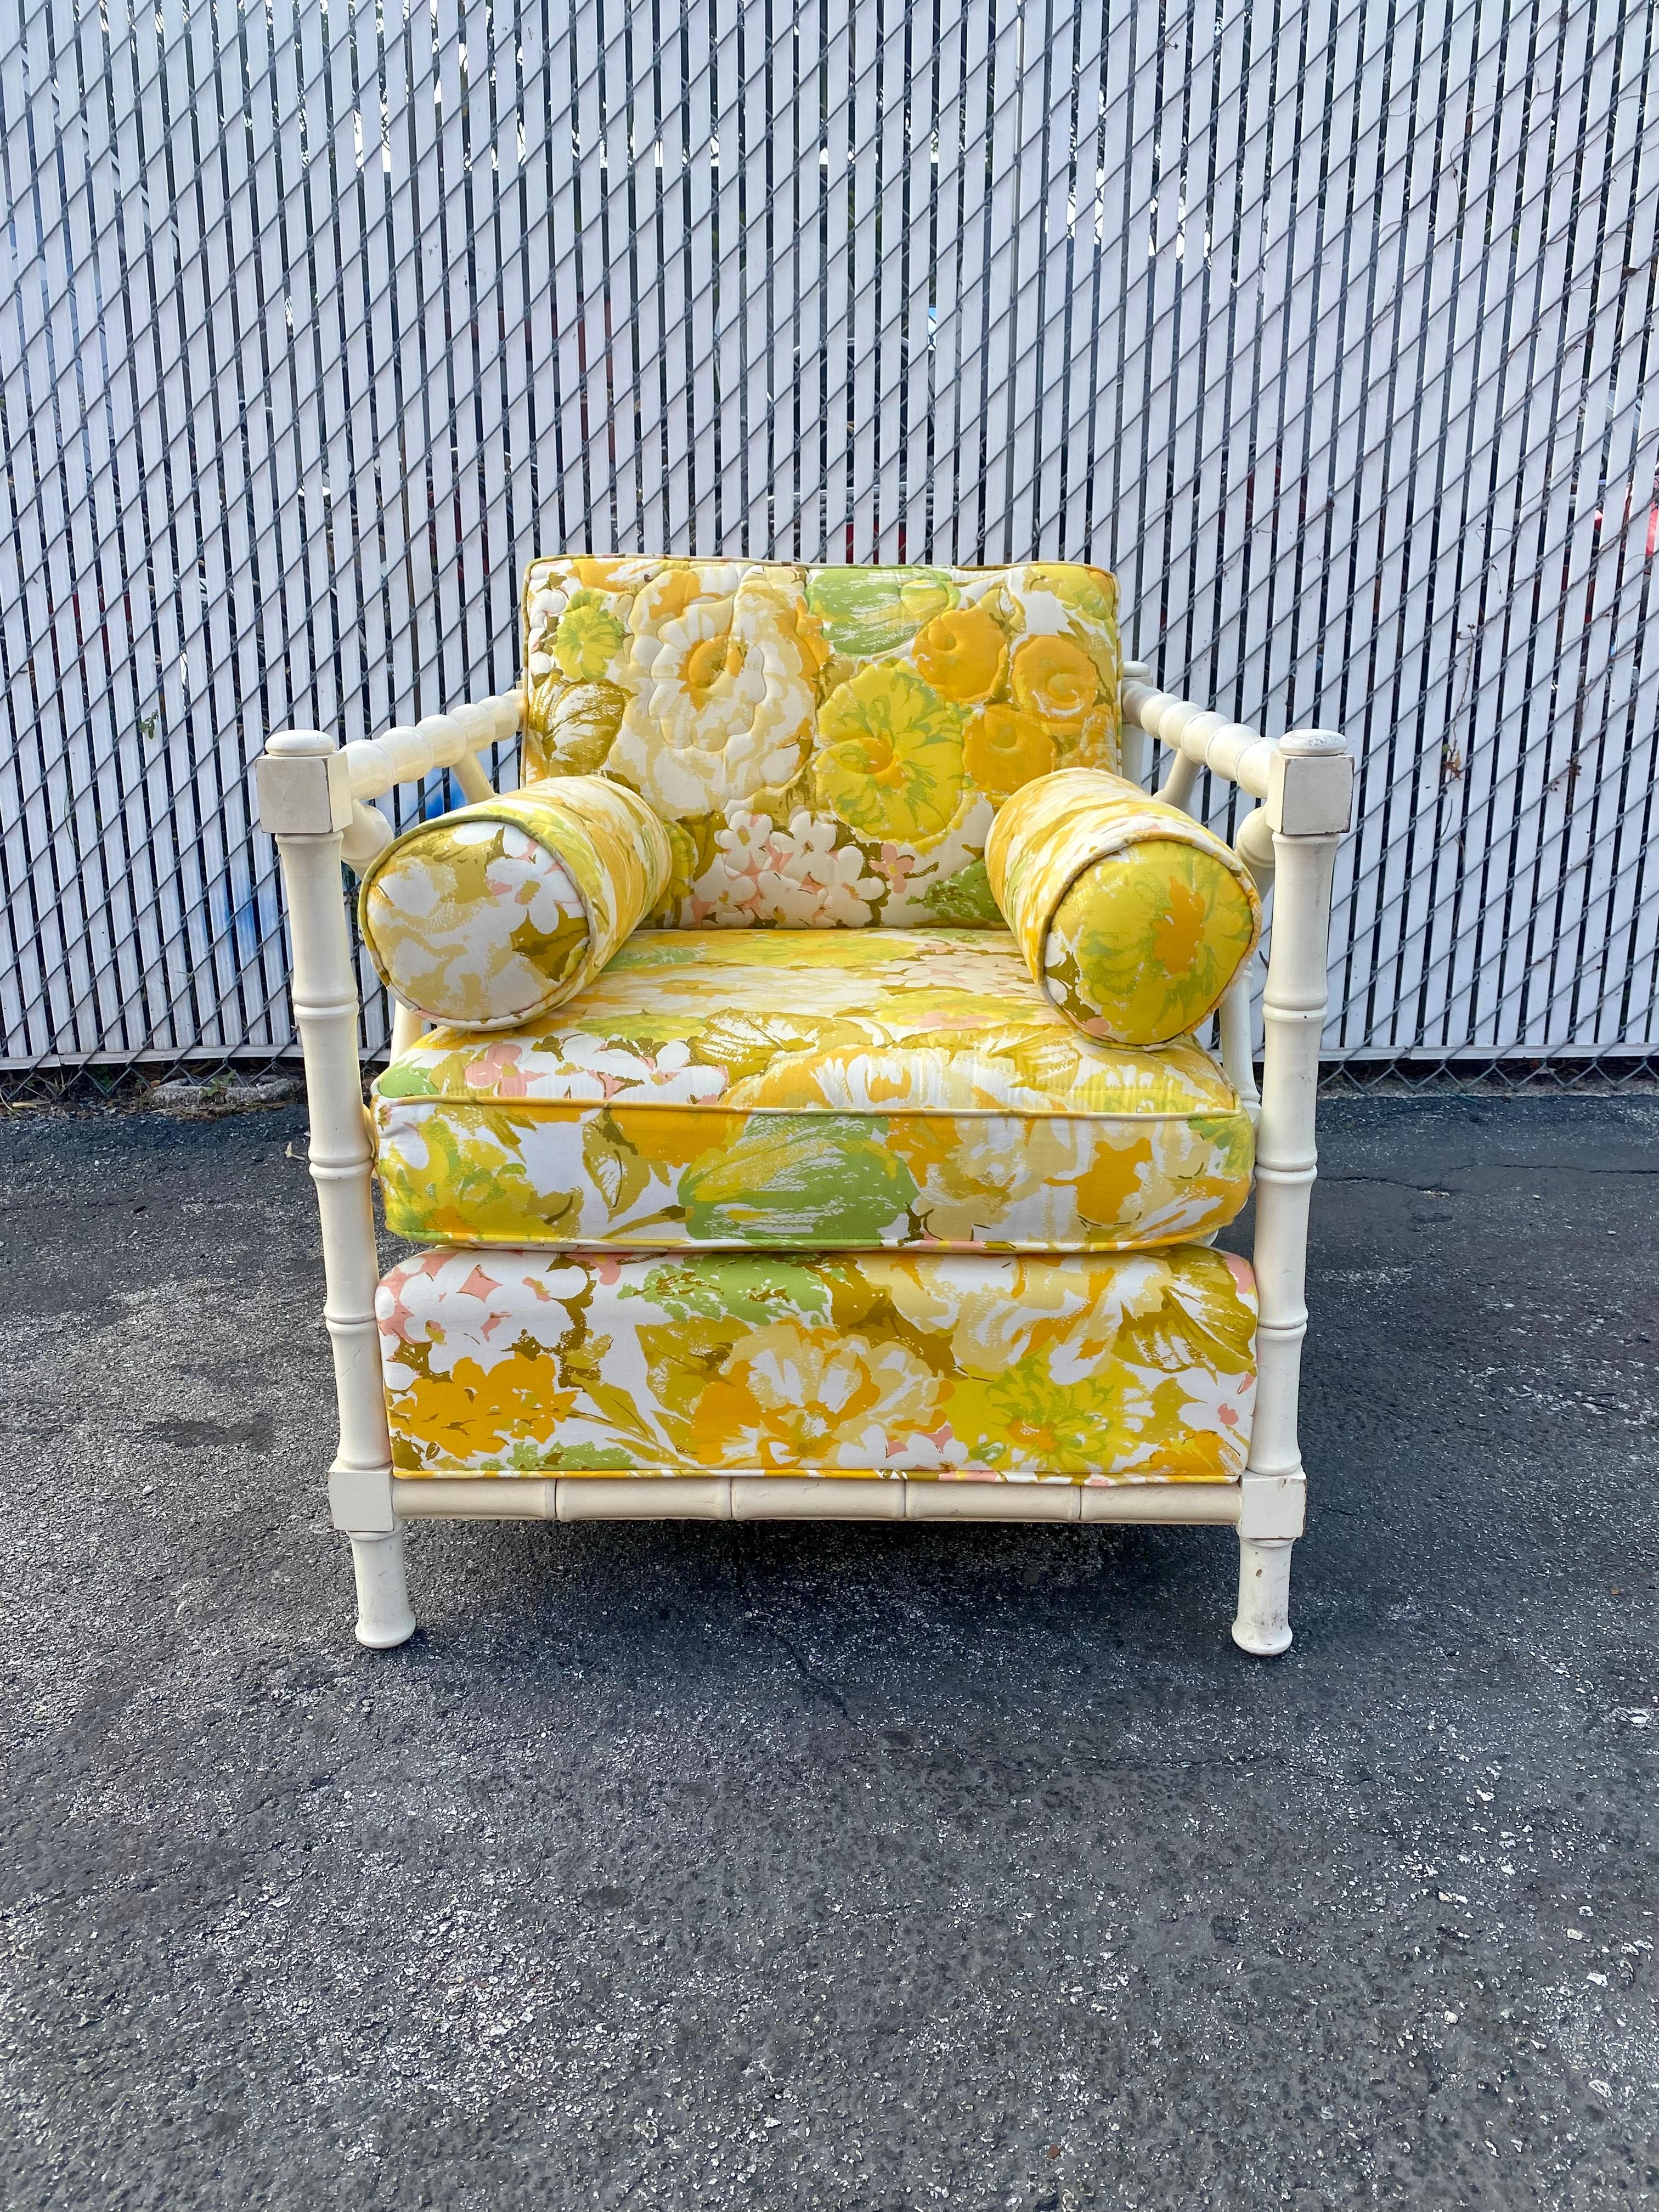 On offer on this occasion is one of the most stunning, faux bamboo handcrafted wood chair you could hope to find. Outstanding design is exhibited throughout. The beautiful floral Chinoserie style chair is statement piece which is also extremely